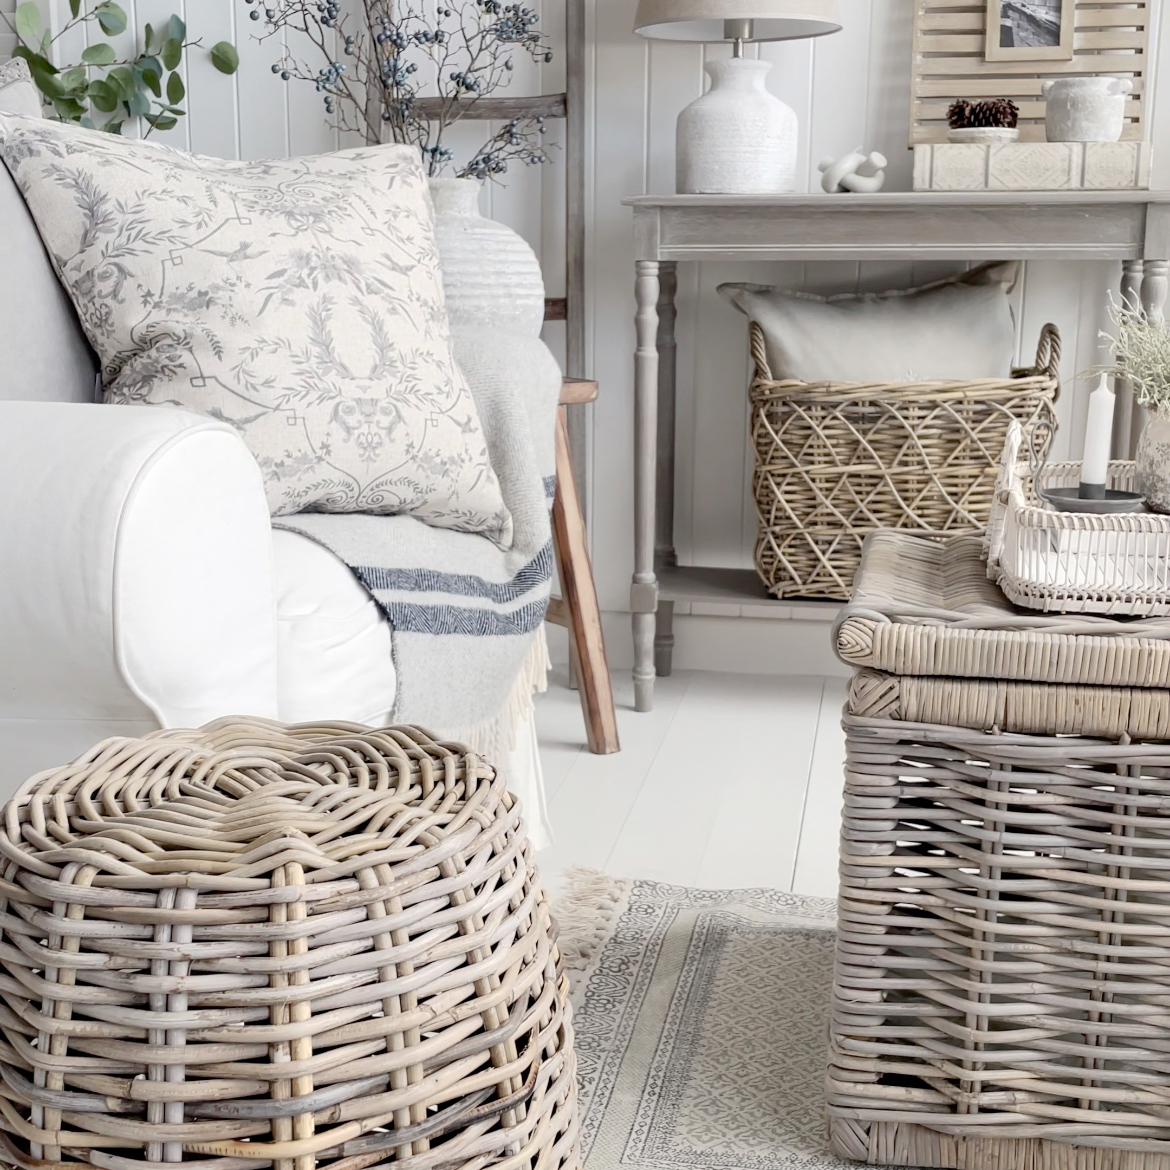 Find Out What The Top Popular Furniture Brands